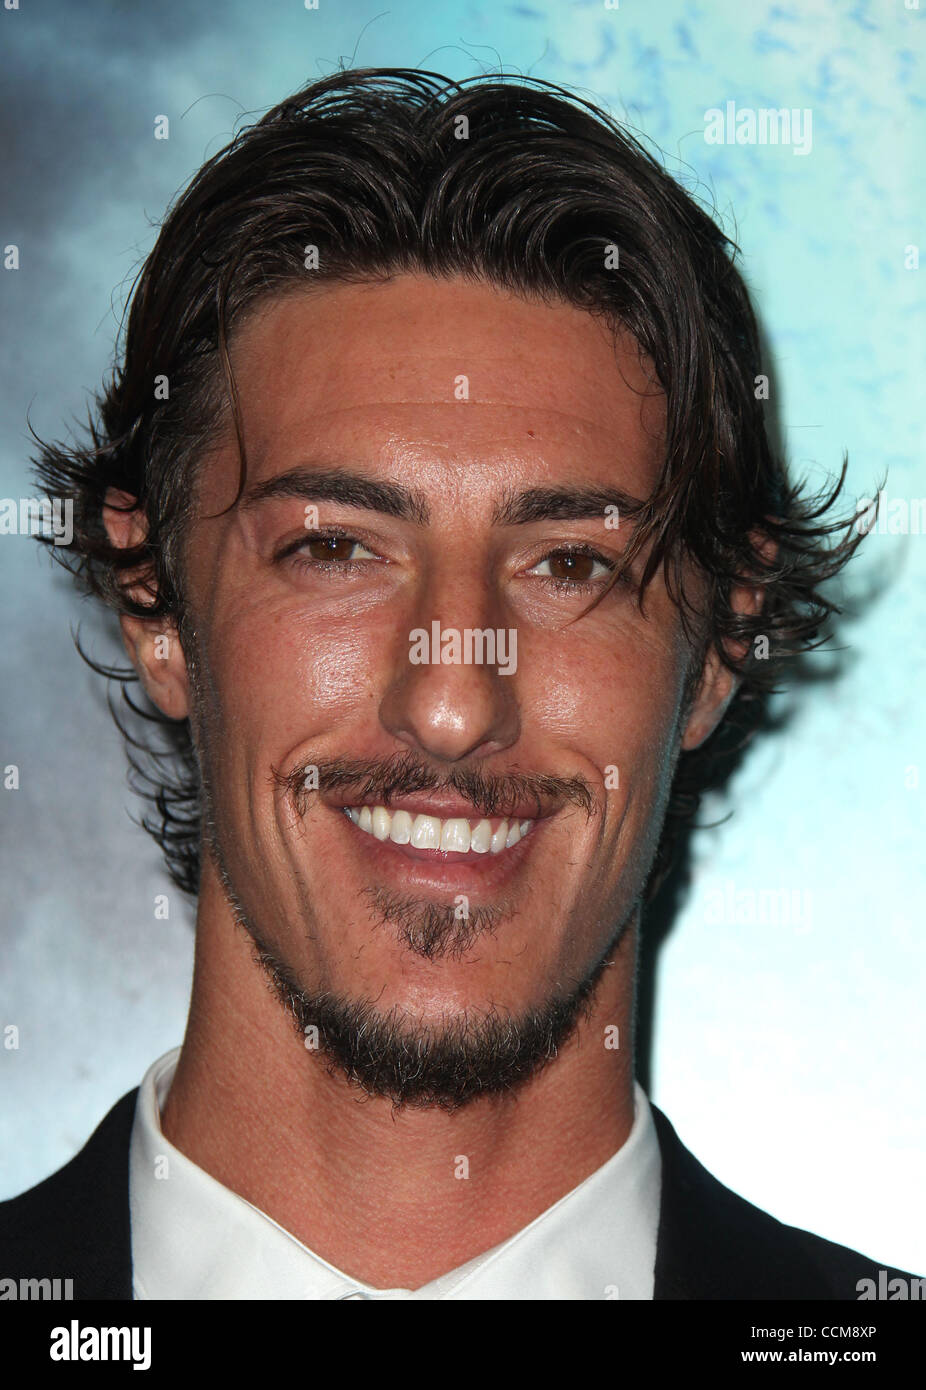 Eric Balfour at the Bethesda Softworks' Rage Video Game Launch Party held  at Chinatown's Historical Plaza Gin Ling Lane in Los Angeles, CA on Friday,  September 30, 2011. Photo by Pedro Ulayan